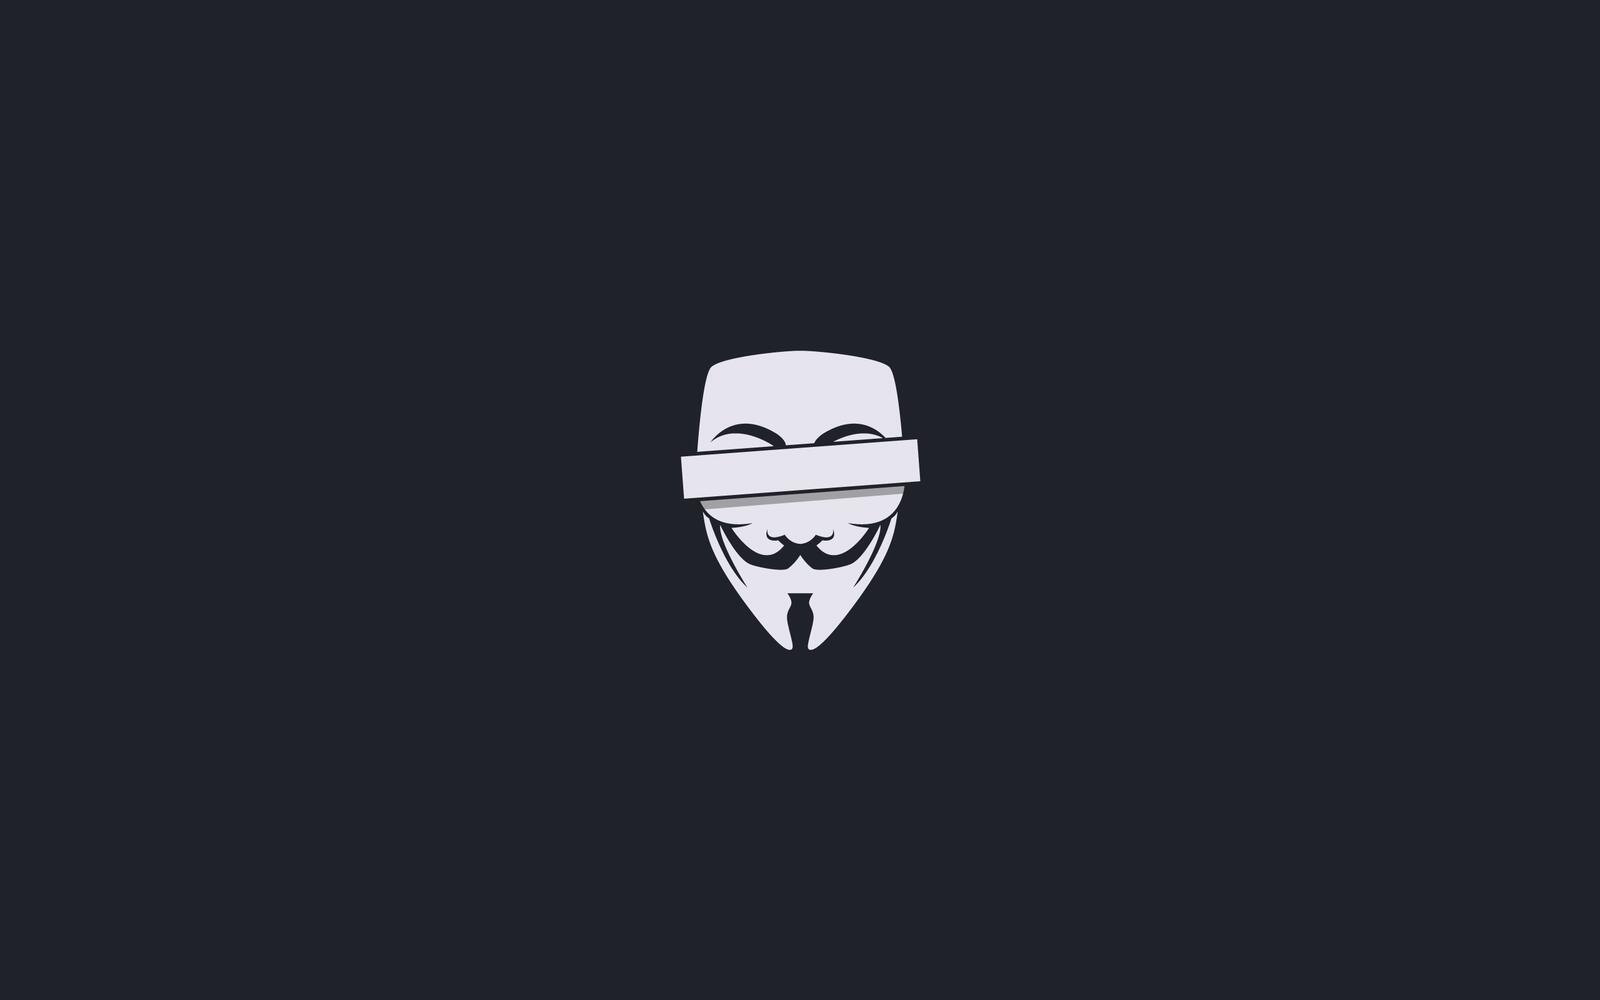 Wallpapers anonymous the guy Fawkes mask cencored on the desktop